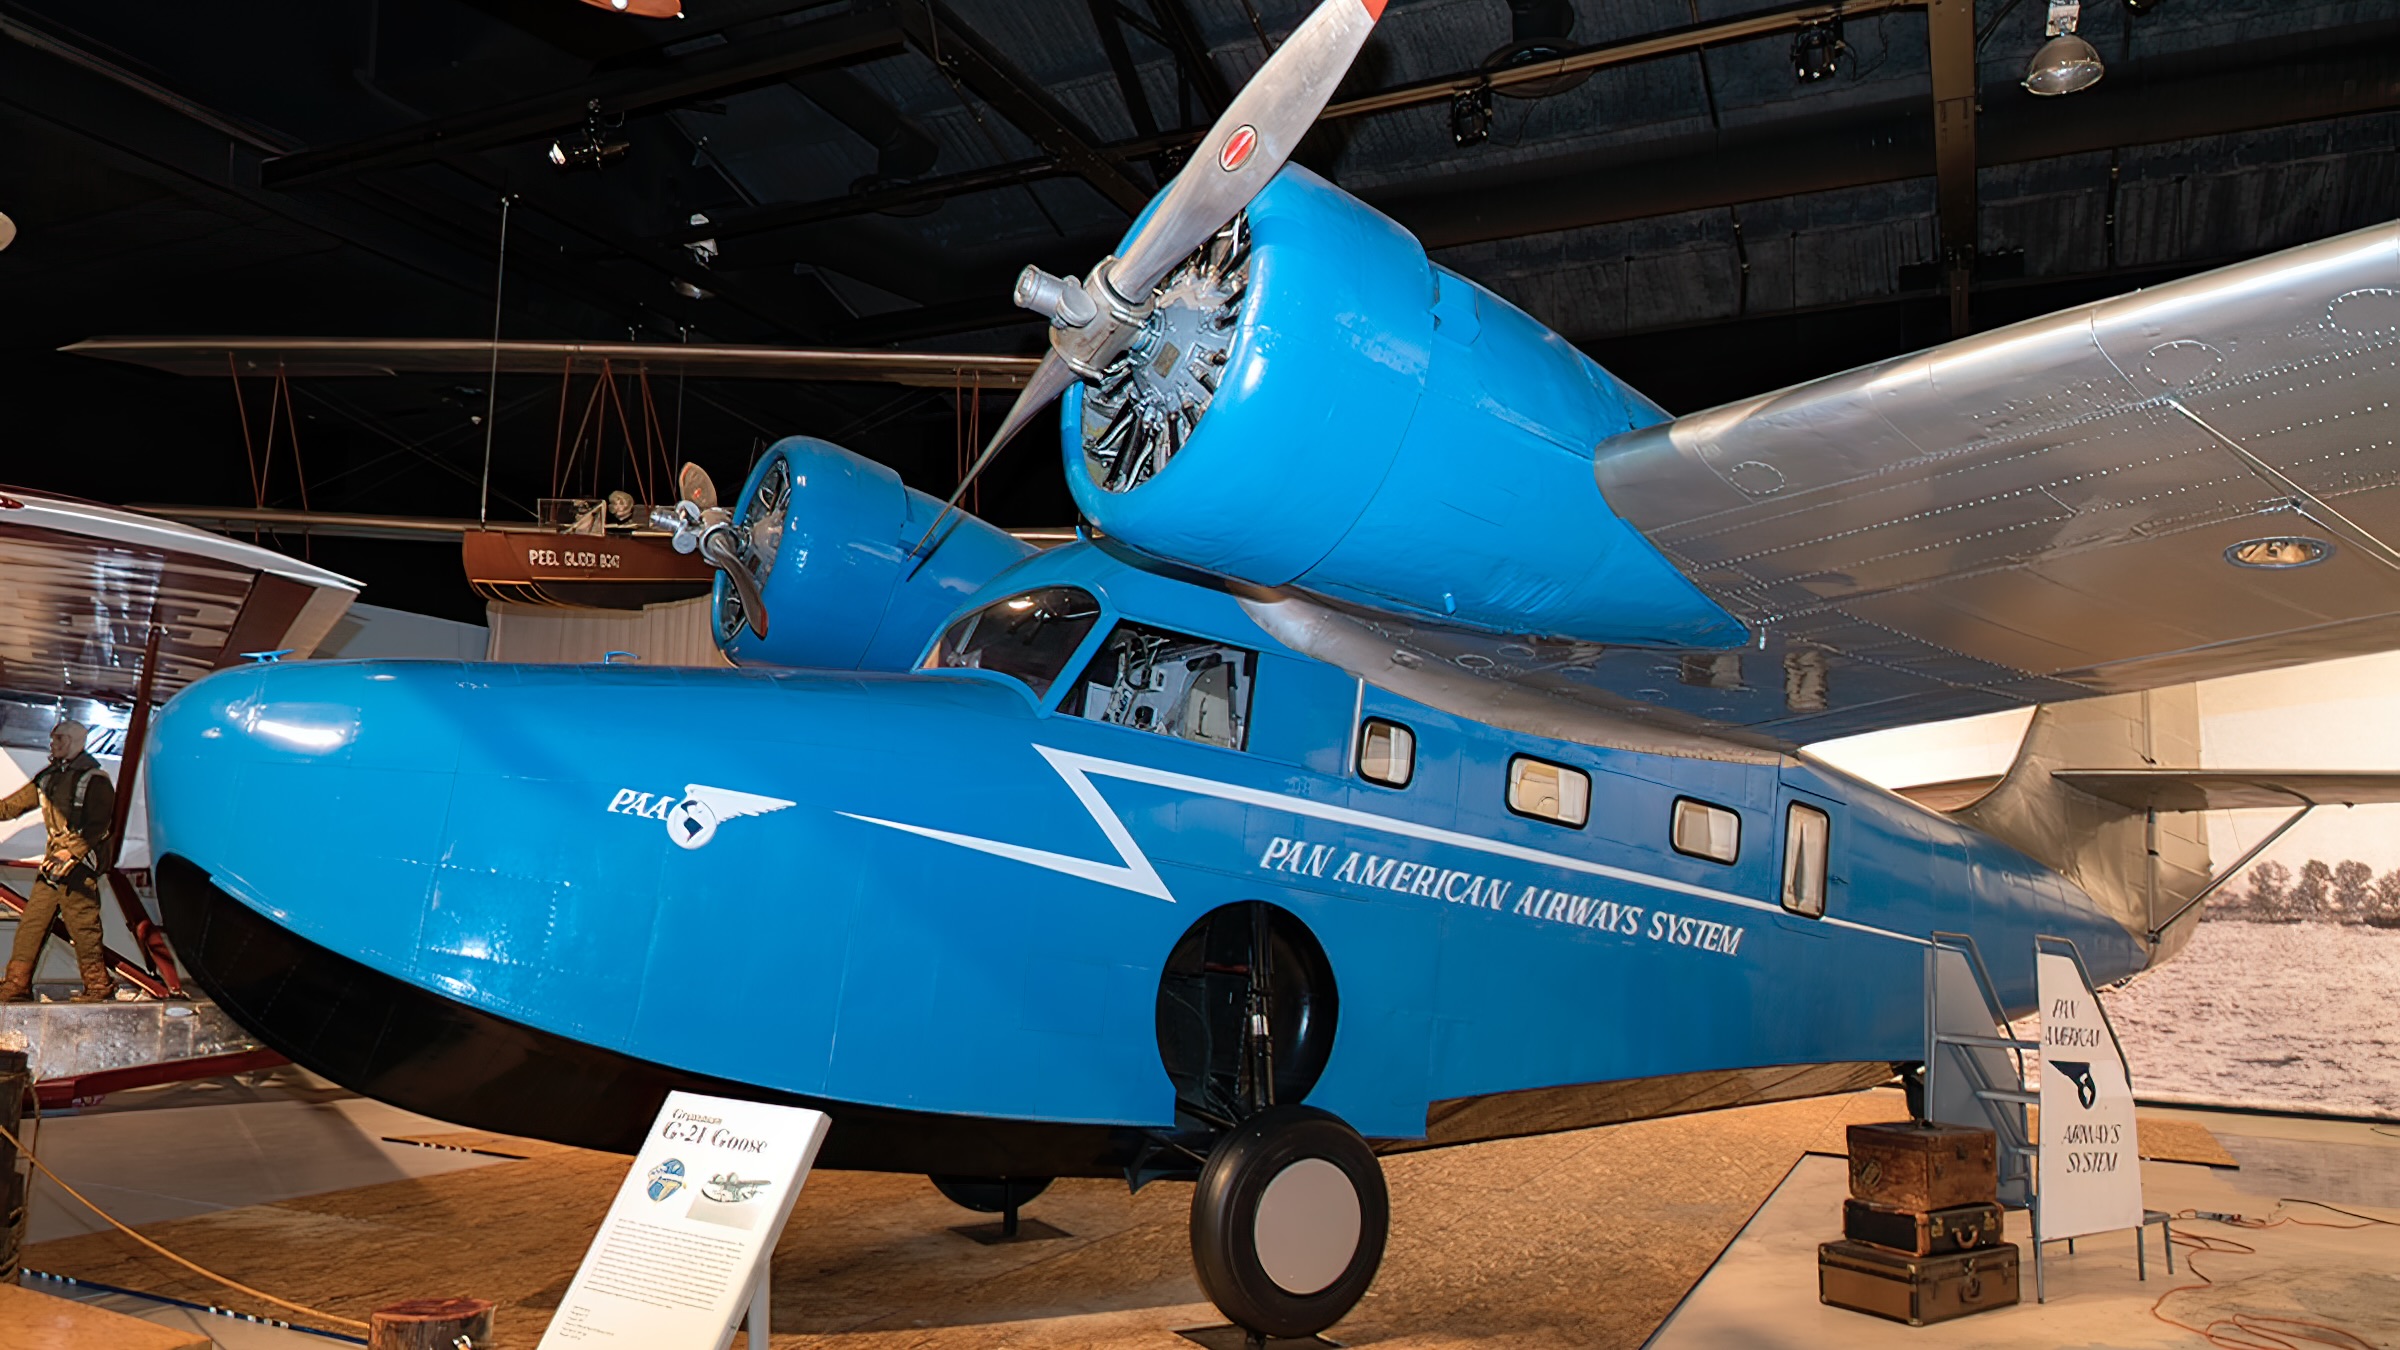 Grumman Goose painted in Pan Am colors at the Cradle of Aviation Museum, Long Island